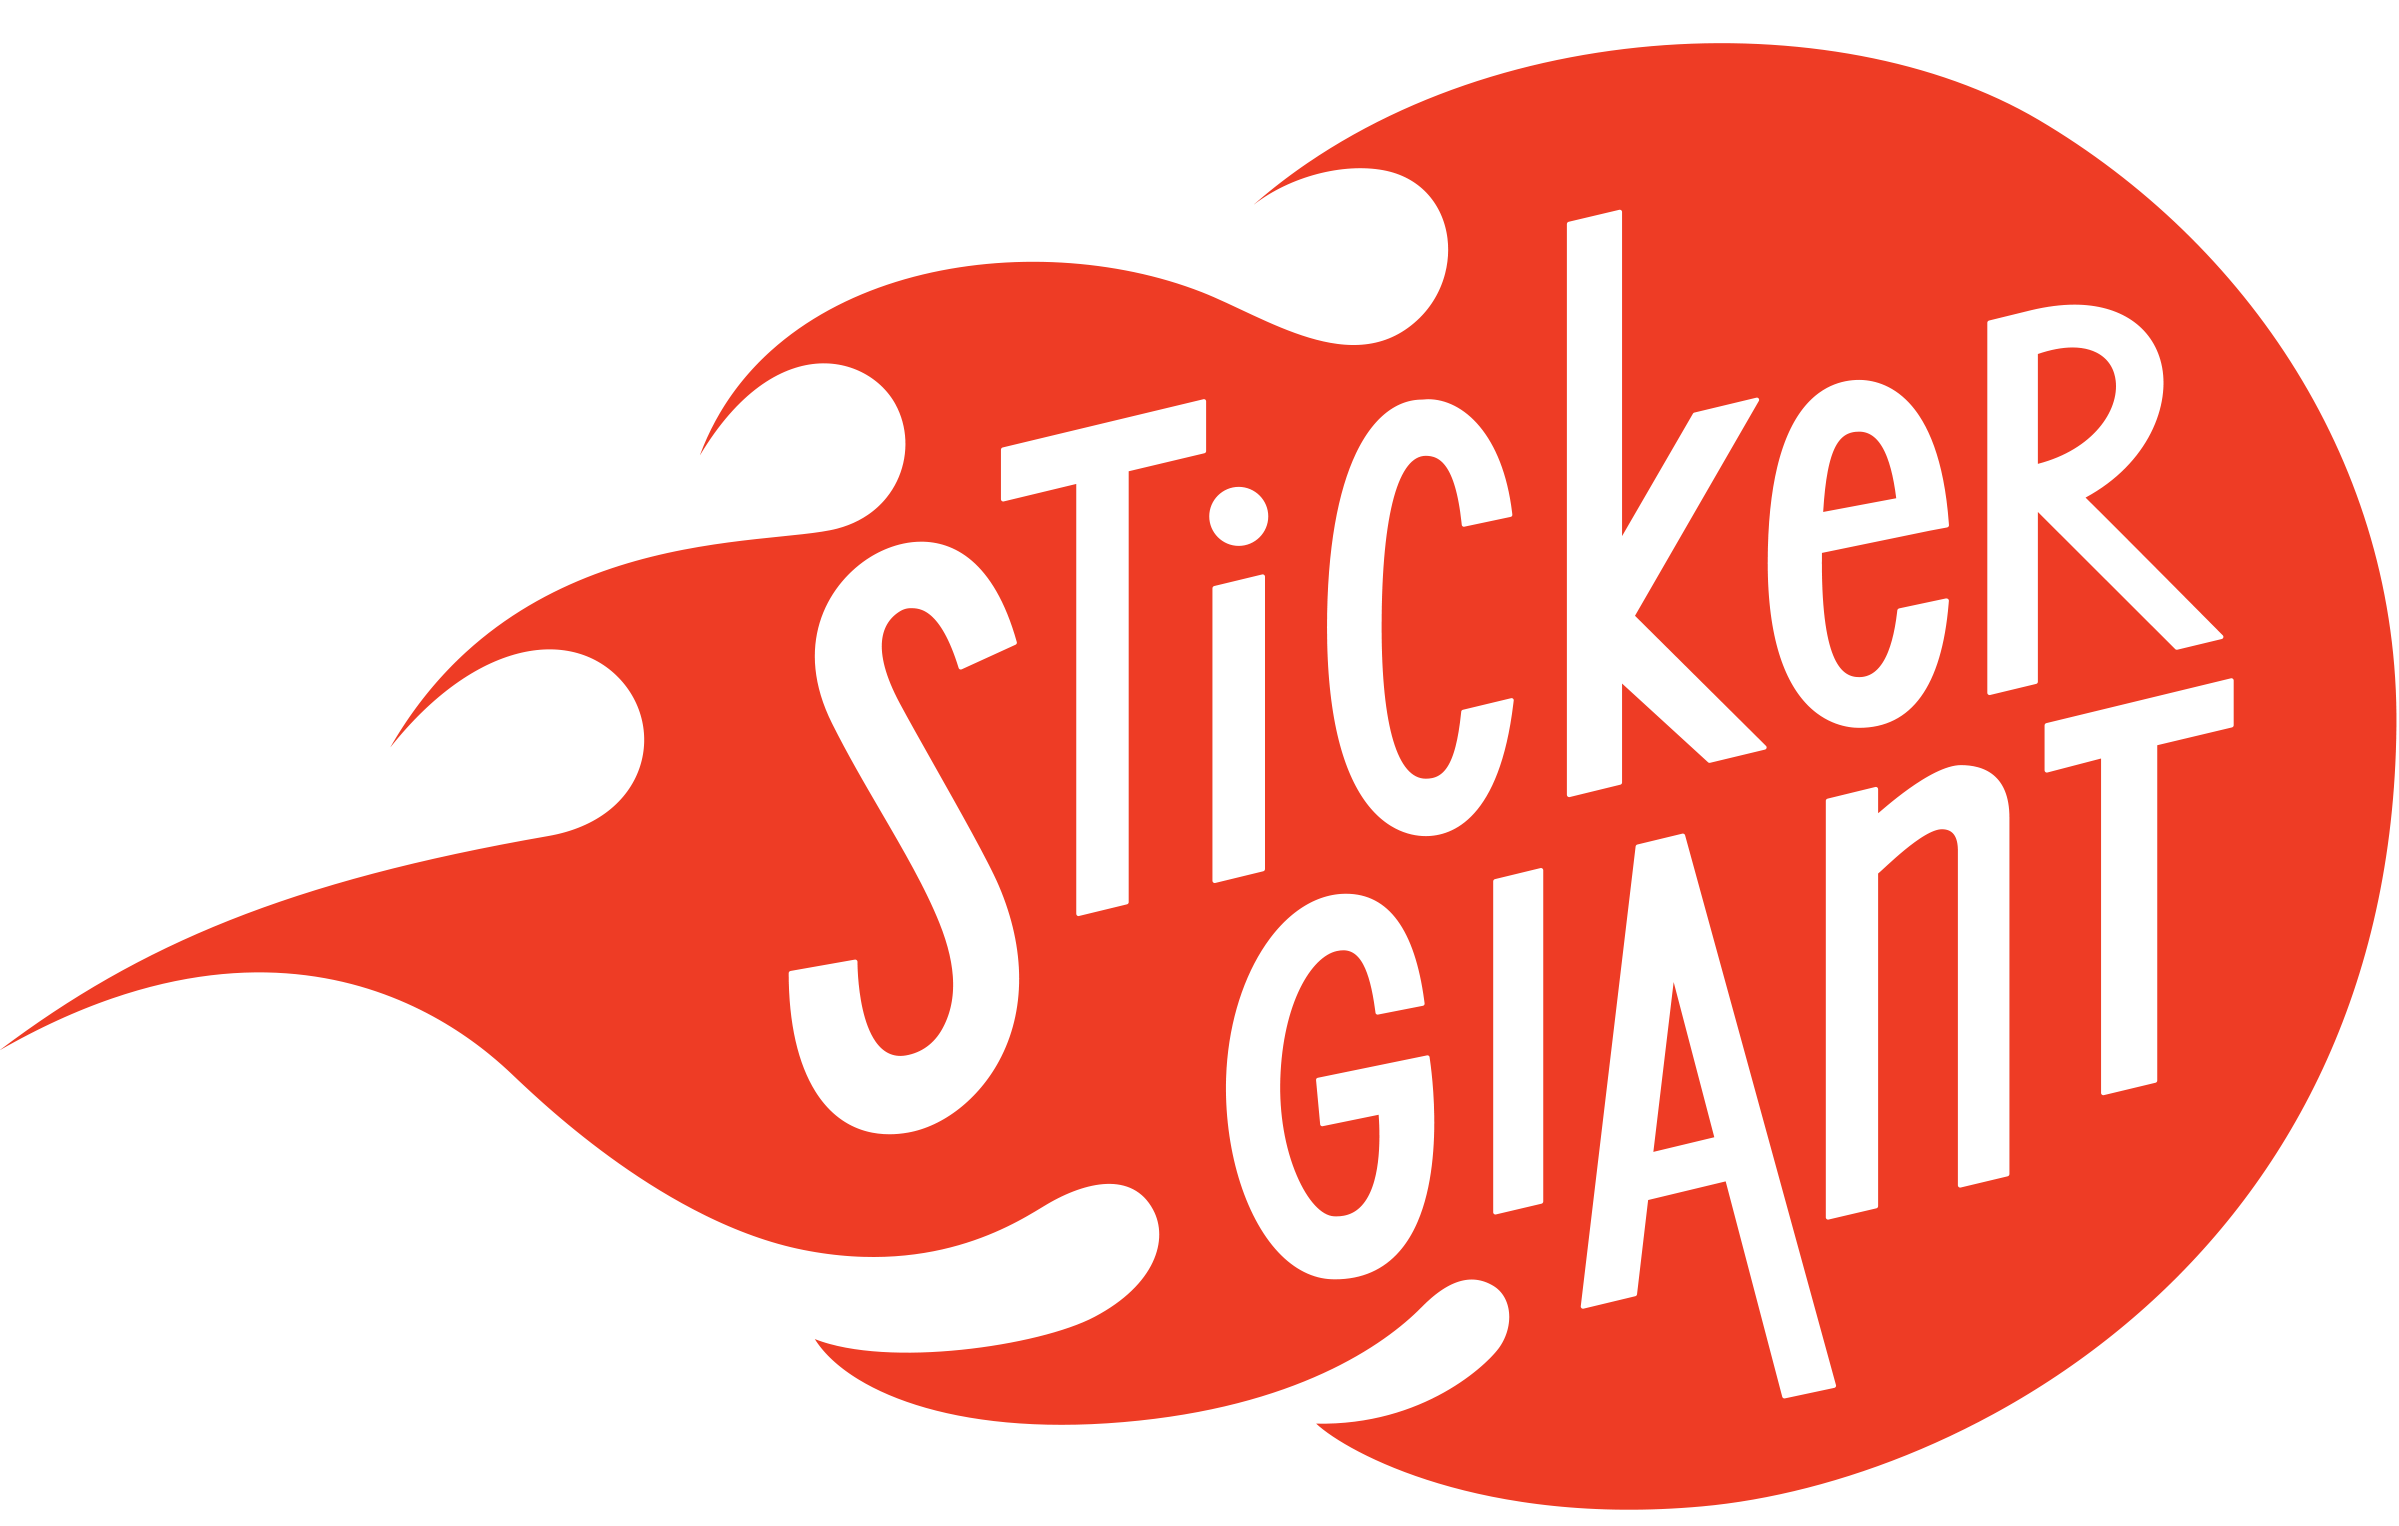 Sticker Giant Coupons & Promo Codes